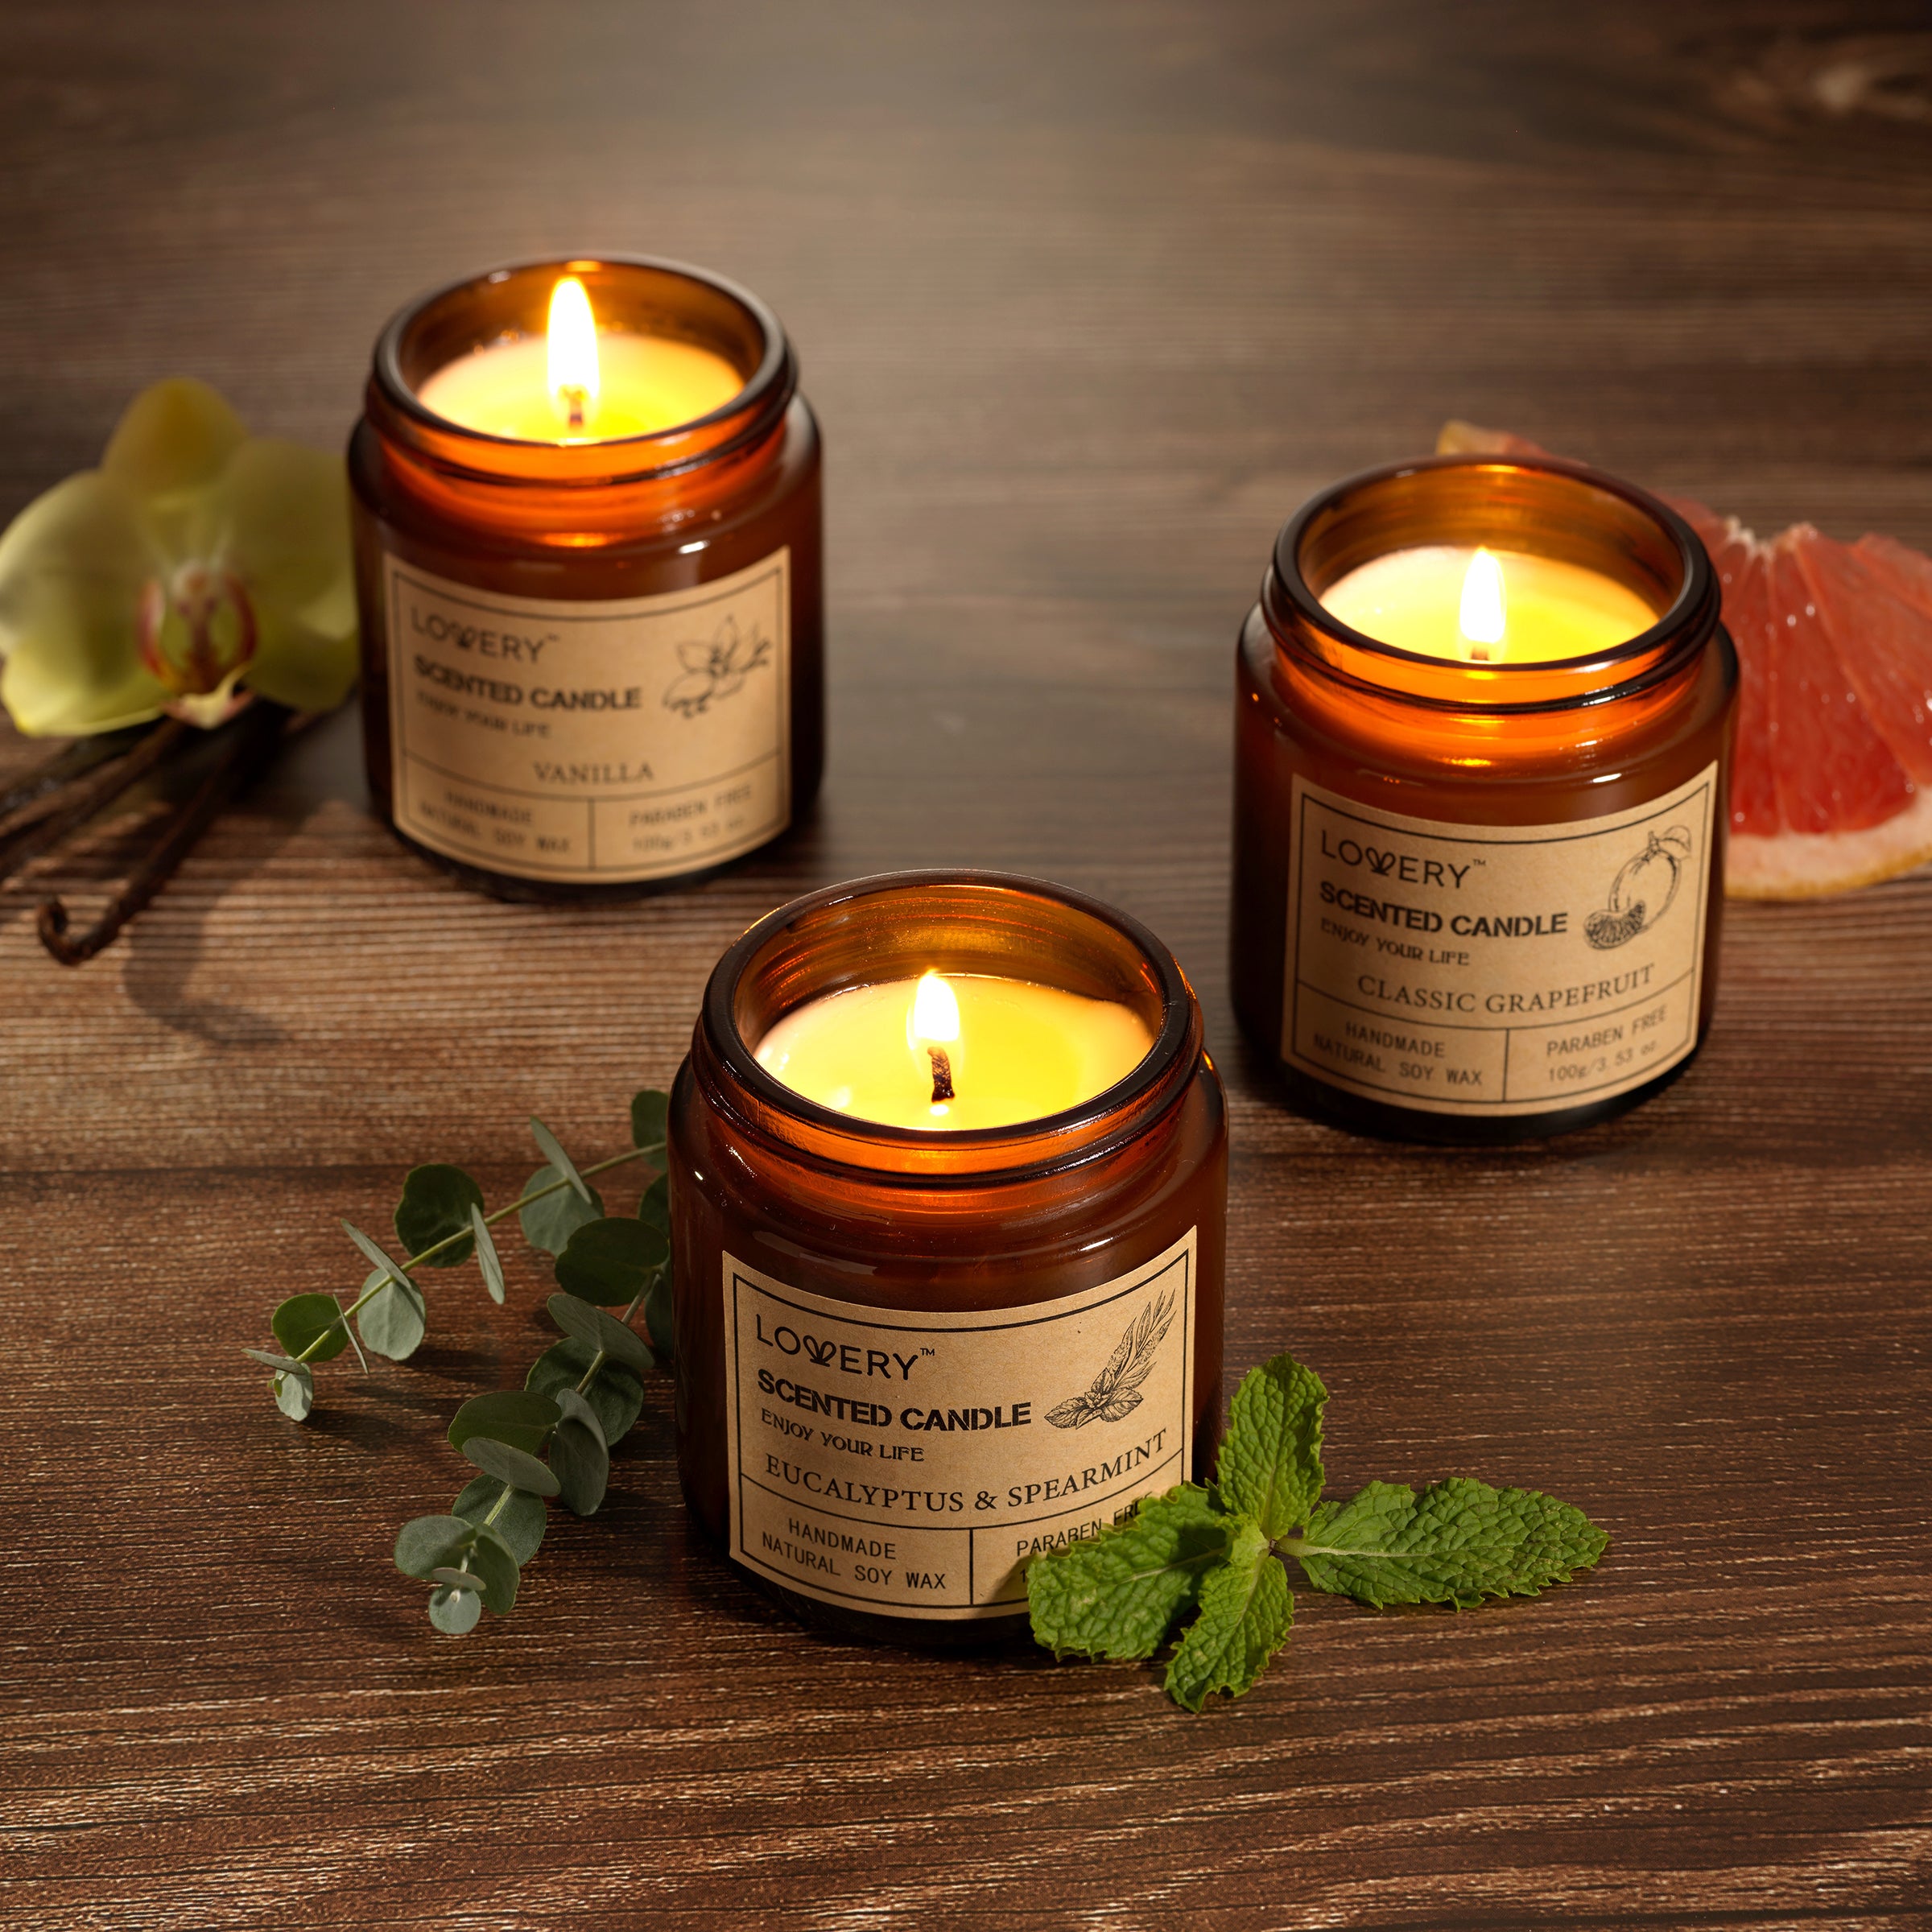 Scented Soy Candles - 6pc Amber Jar Long Lasting Candle Birthday Gifts